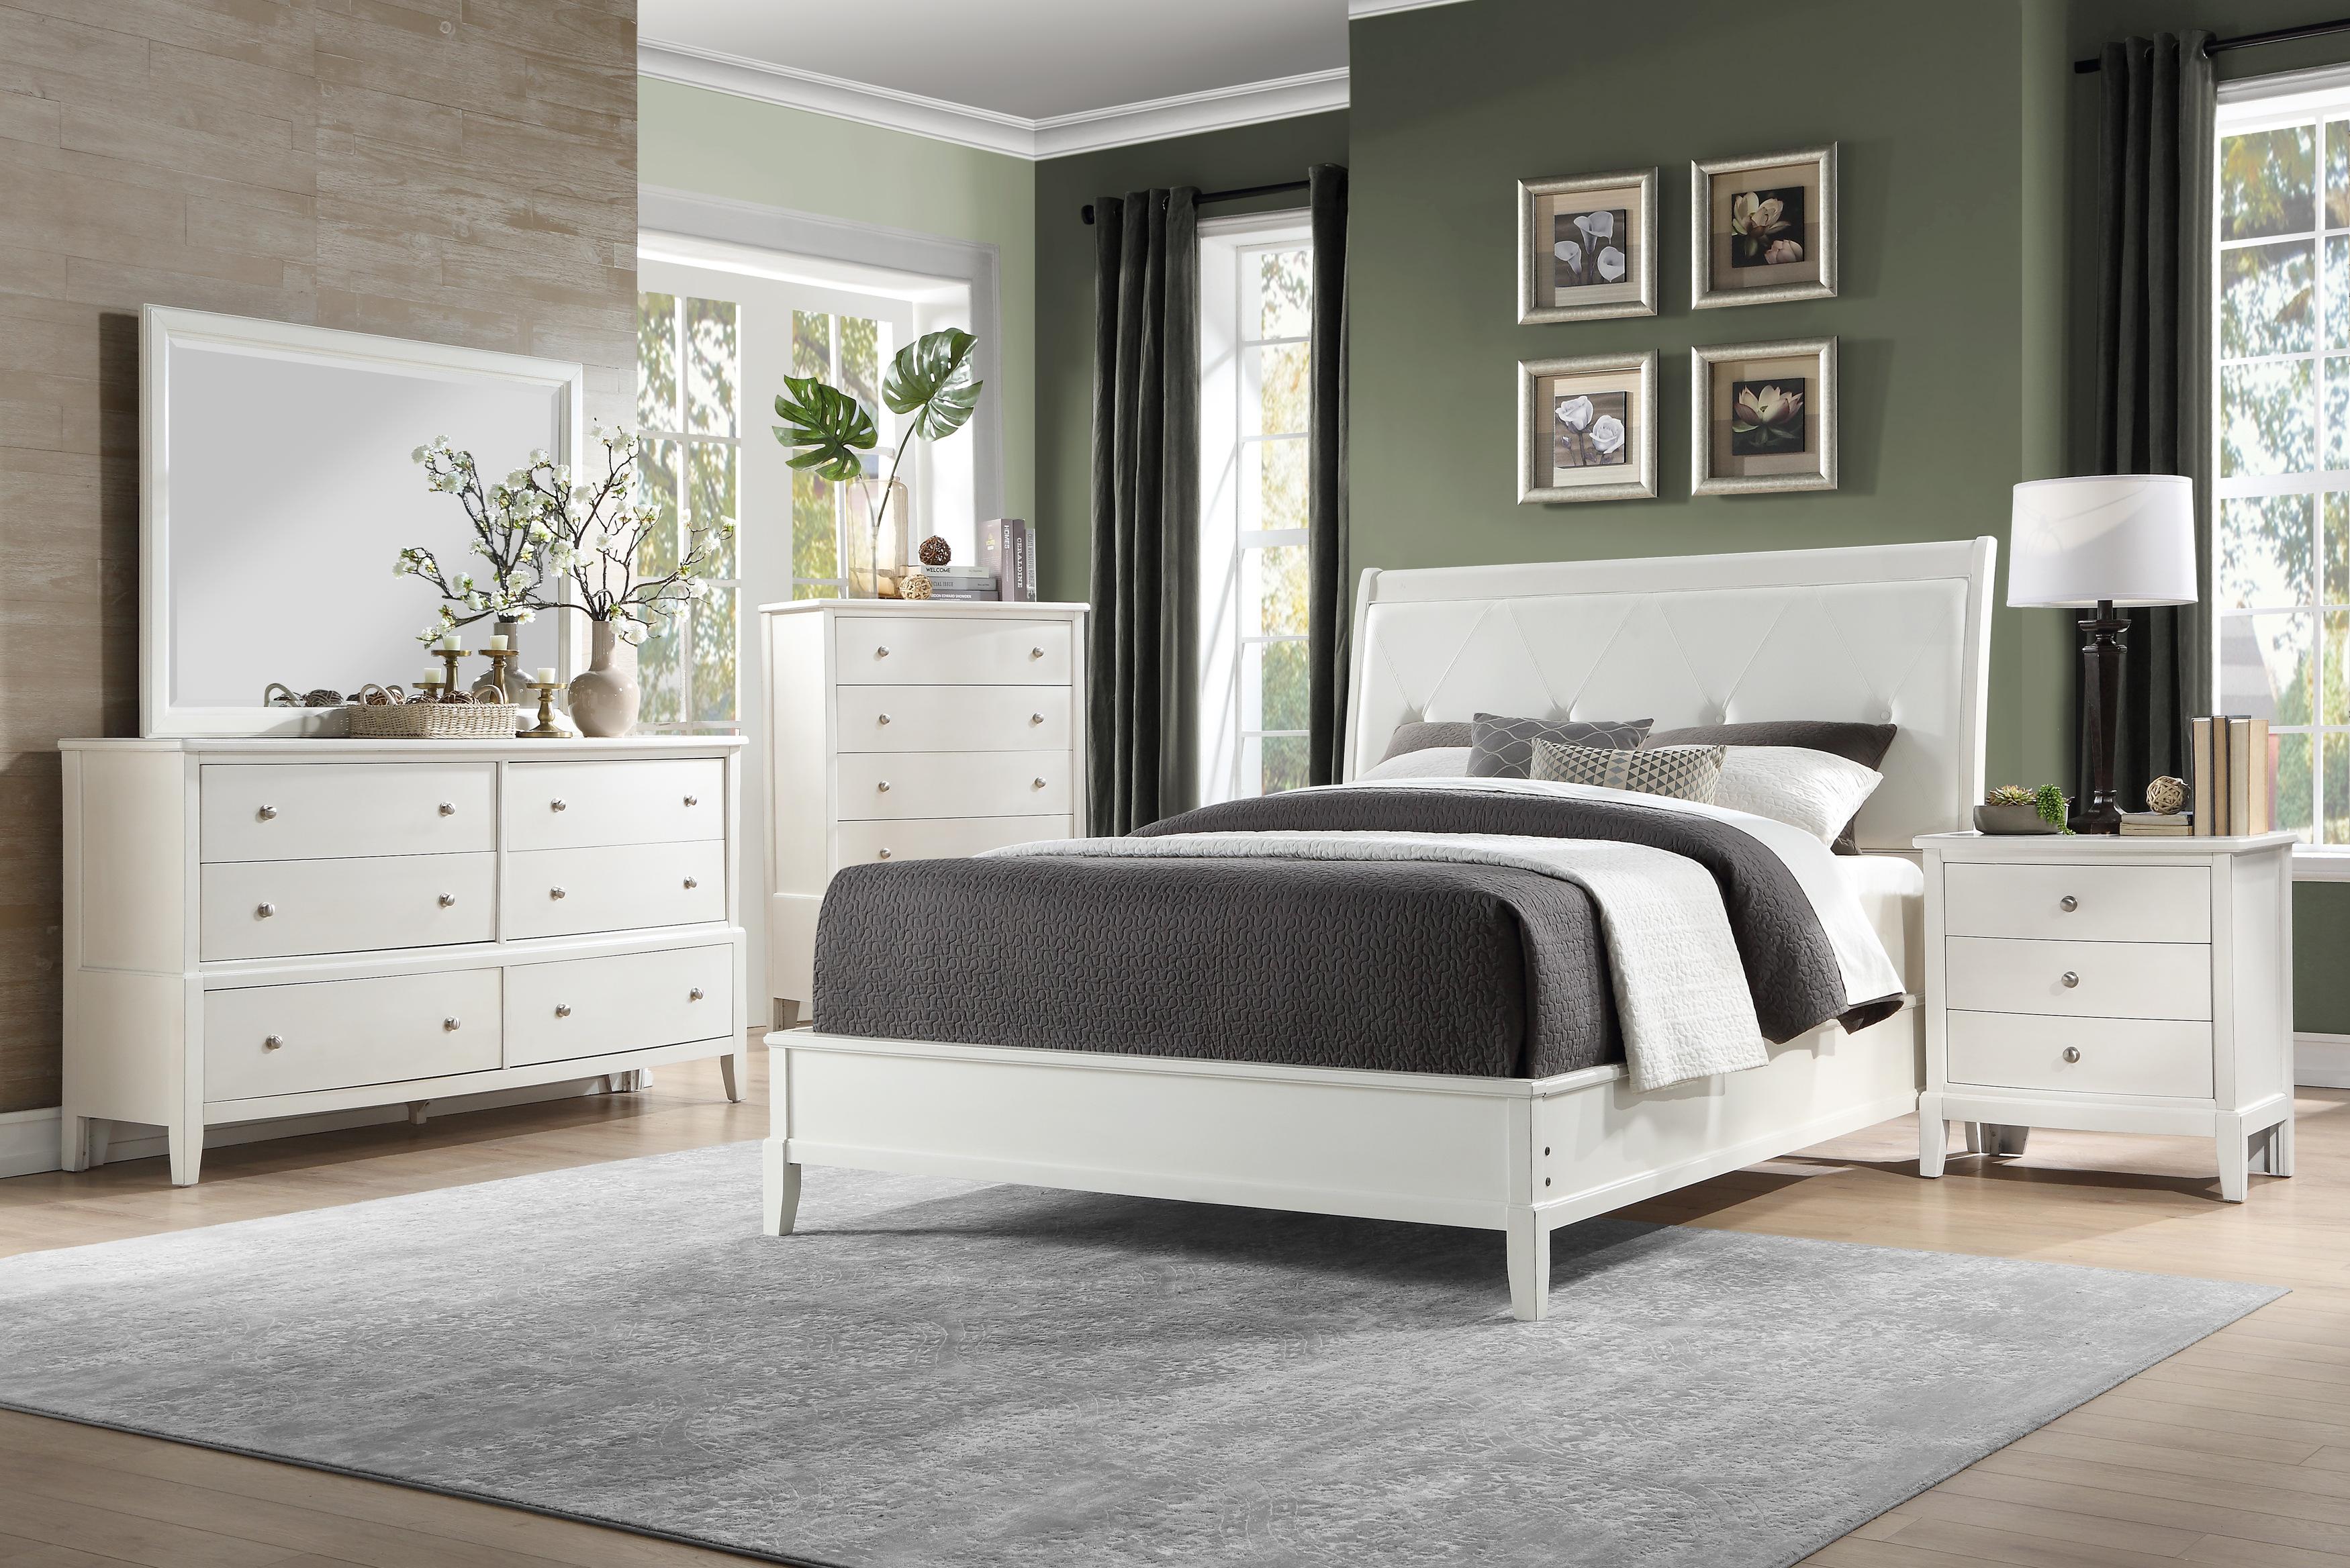 Transitional Bedroom Set 1730KWW-1CK-5PC Cotterill 1730KWW-1CK-5PC in Antique White Faux Leather